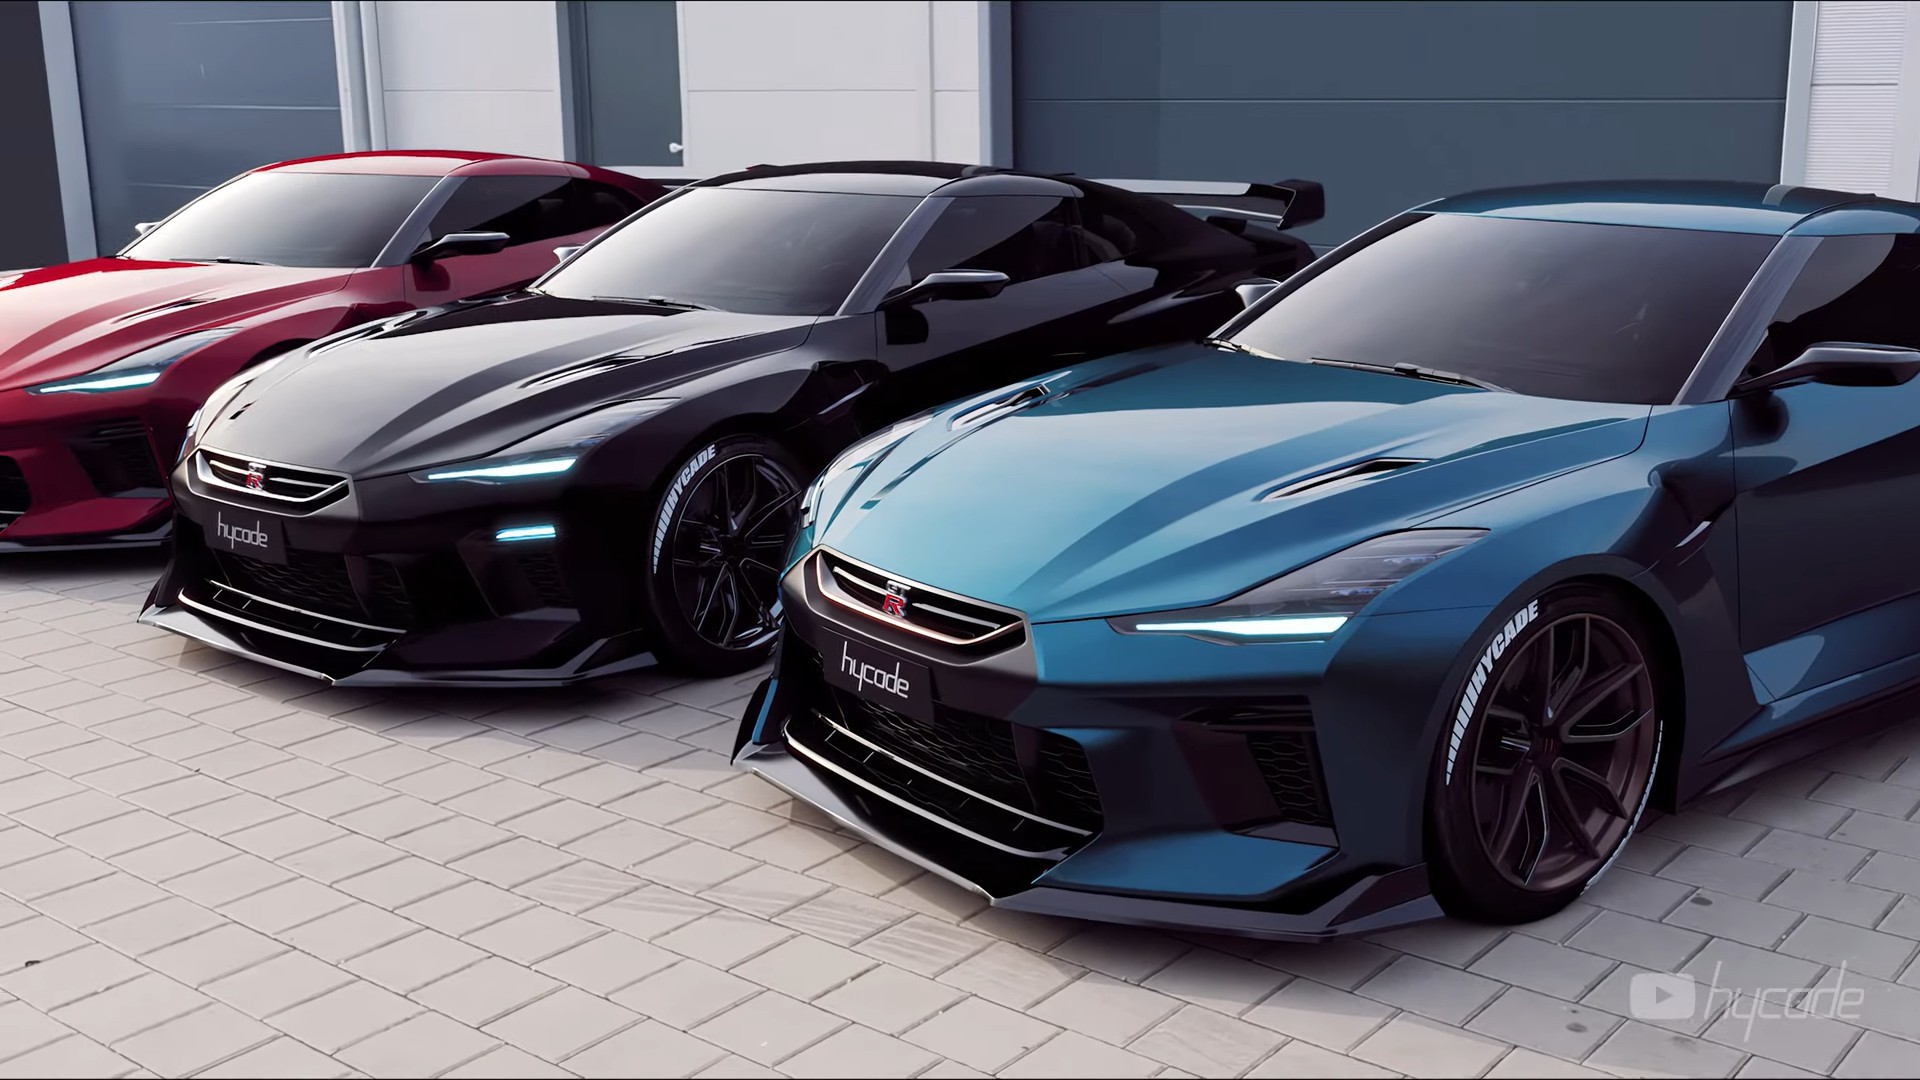 Pack of Digital R36 Nissan GT-R Supercars Dwell Around Flaunting Ritzy  Shades - autoevolution